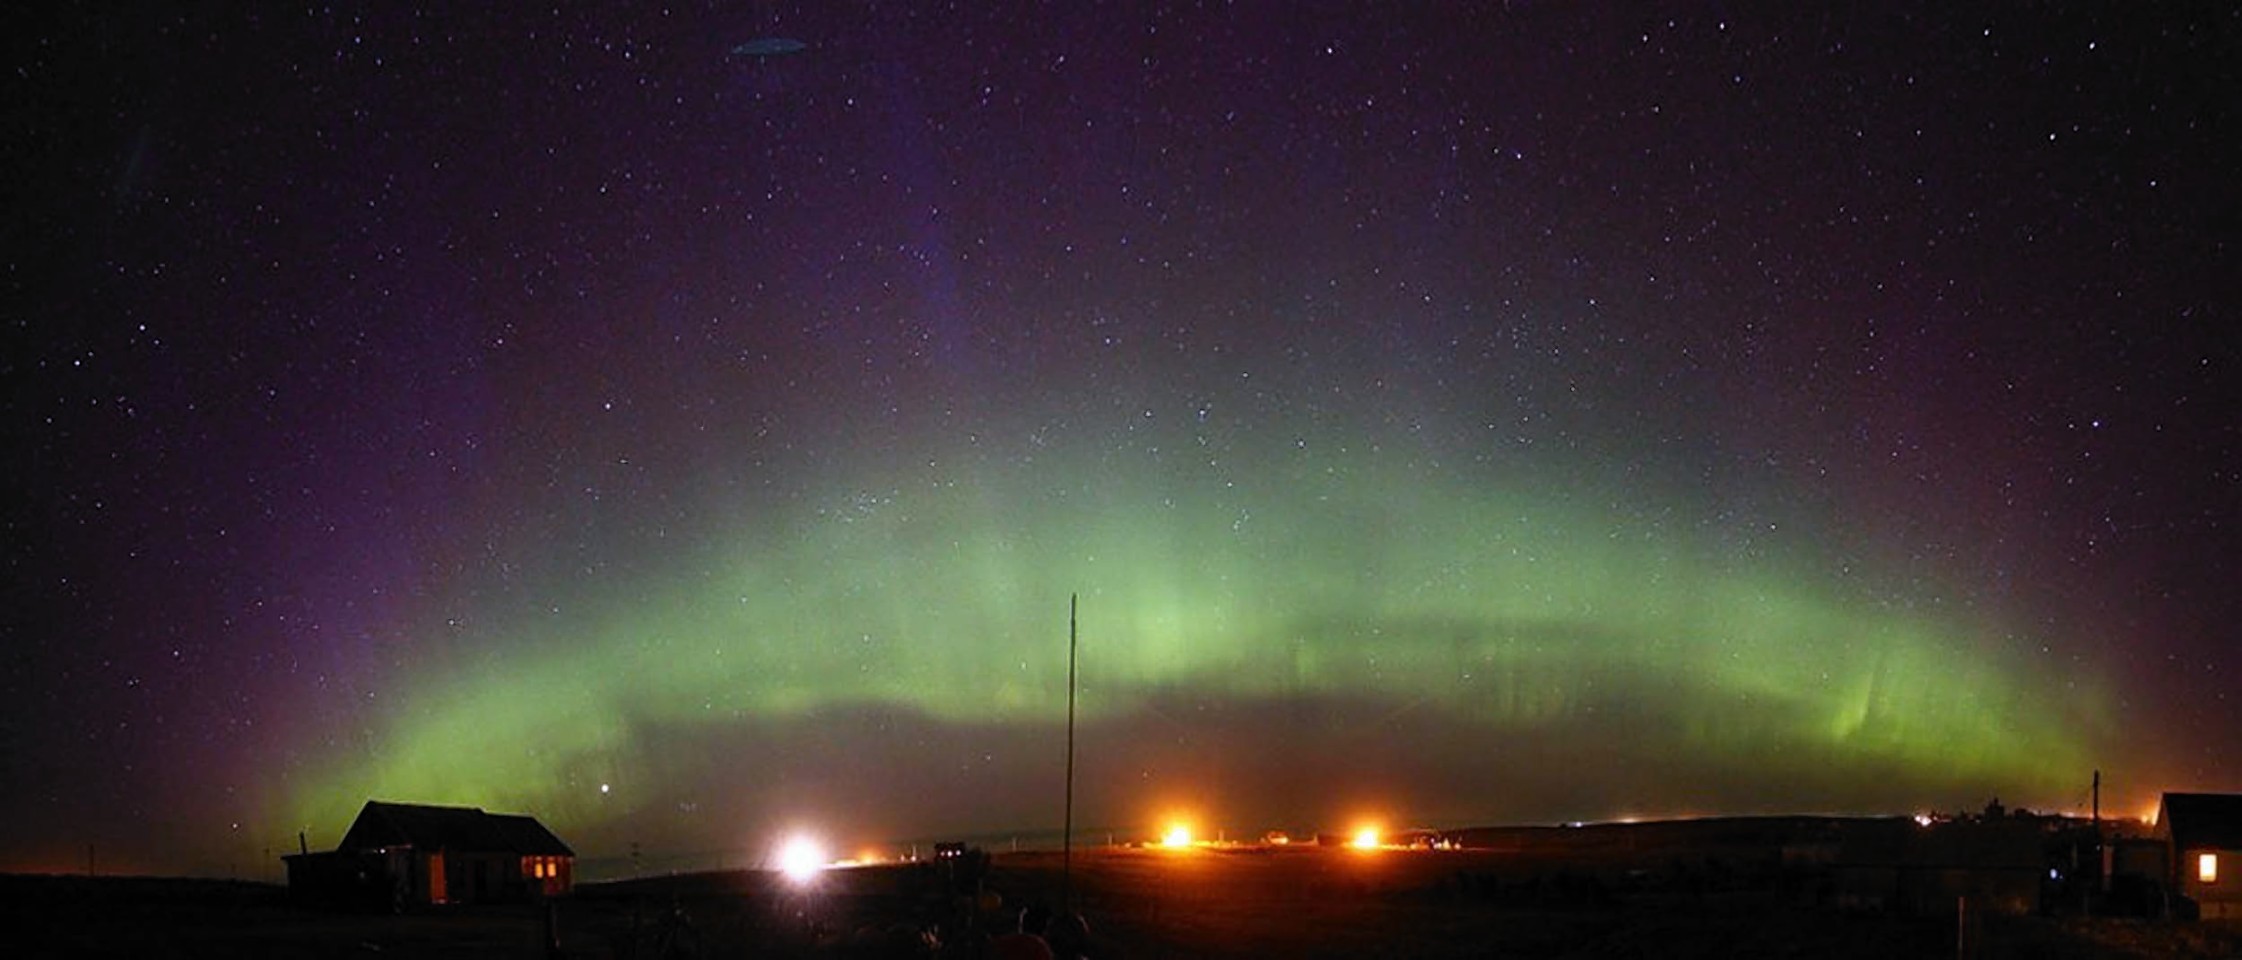 An aurora rainbow captured from the Isle of Lewis by photographer John Gray